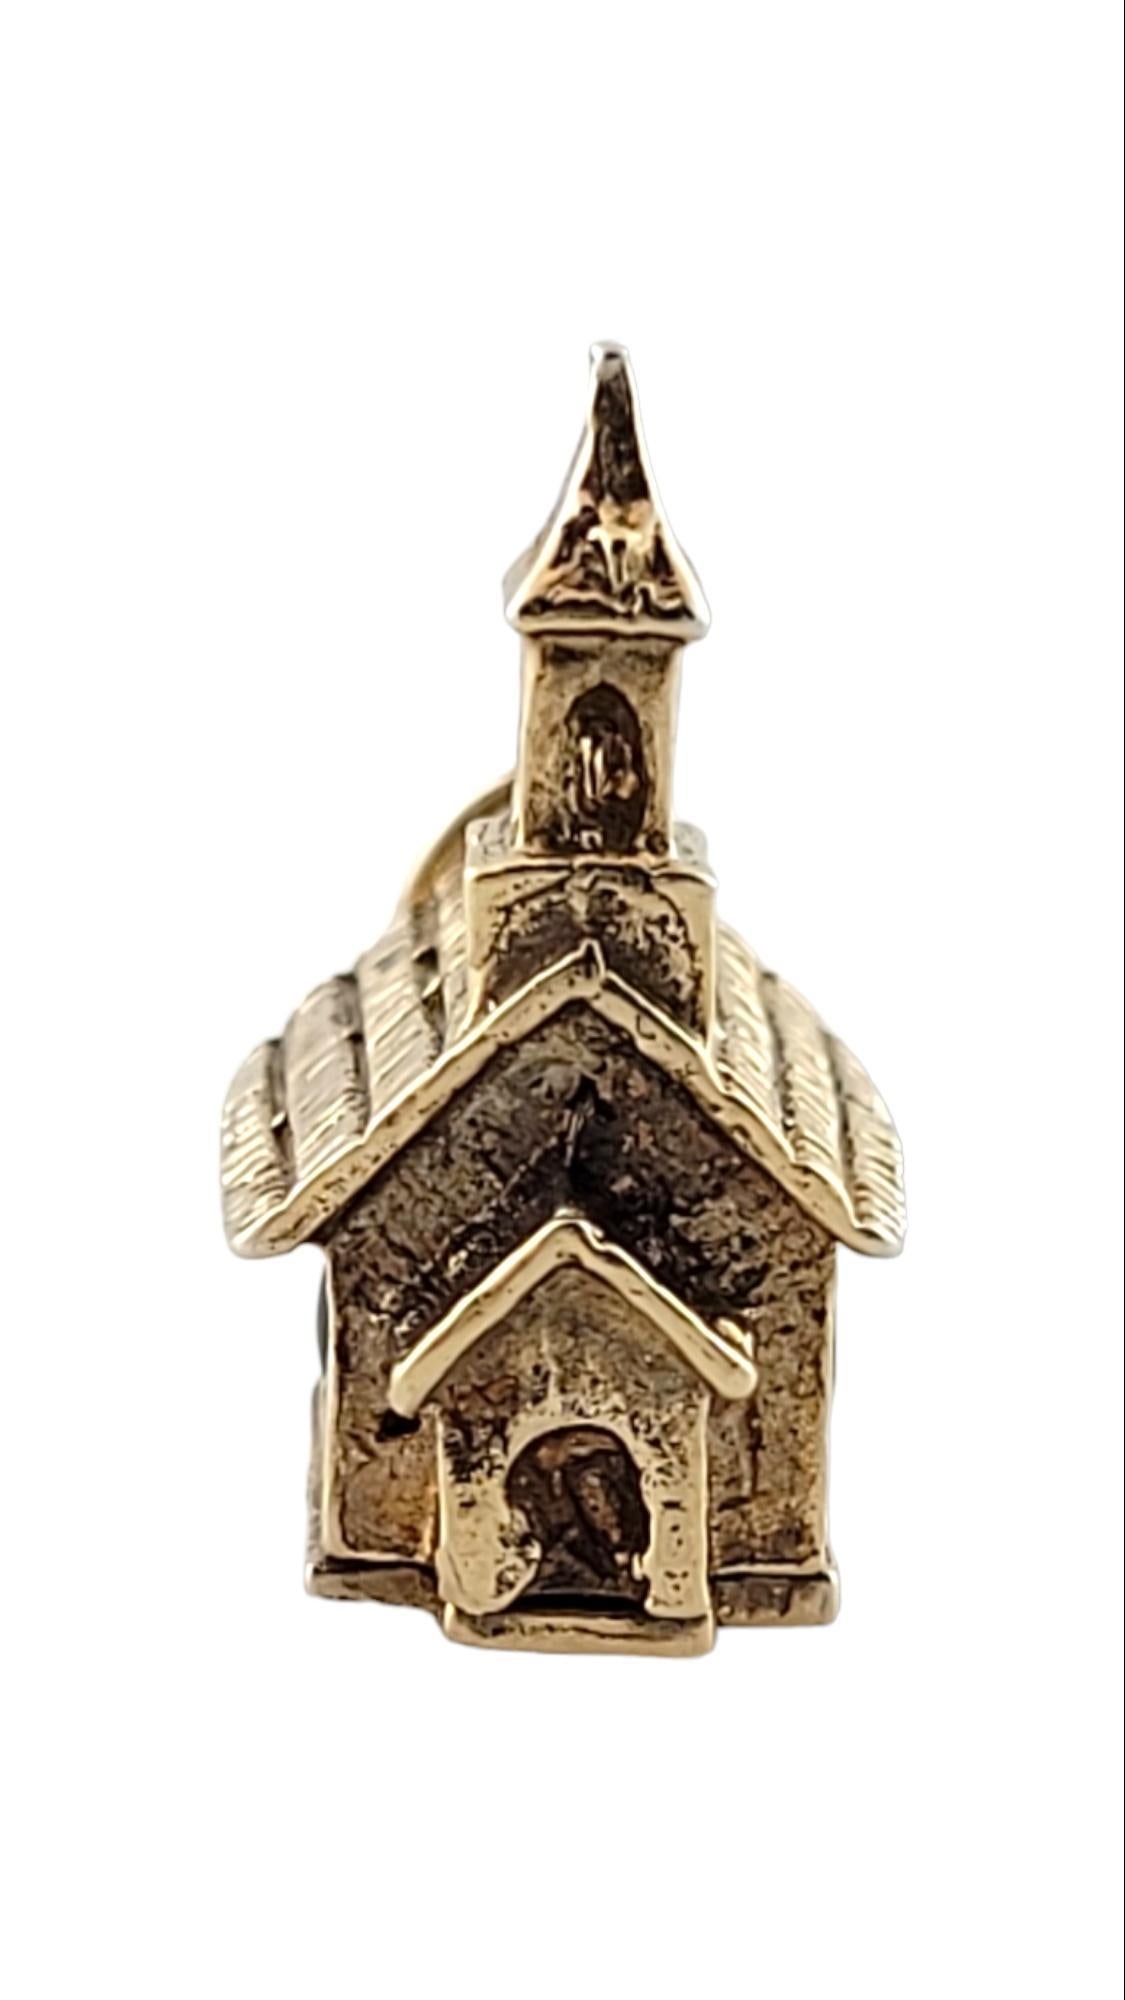 Vintage 10K Yellow Gold Church Pendant with Lord's Prayer Stanhope

This gorgeous church pendant is crafted with beautiful detail from 10K yellow gold and features a stanhope that projects the Lord's Prayer!
(Lord's Prayer is slightly off